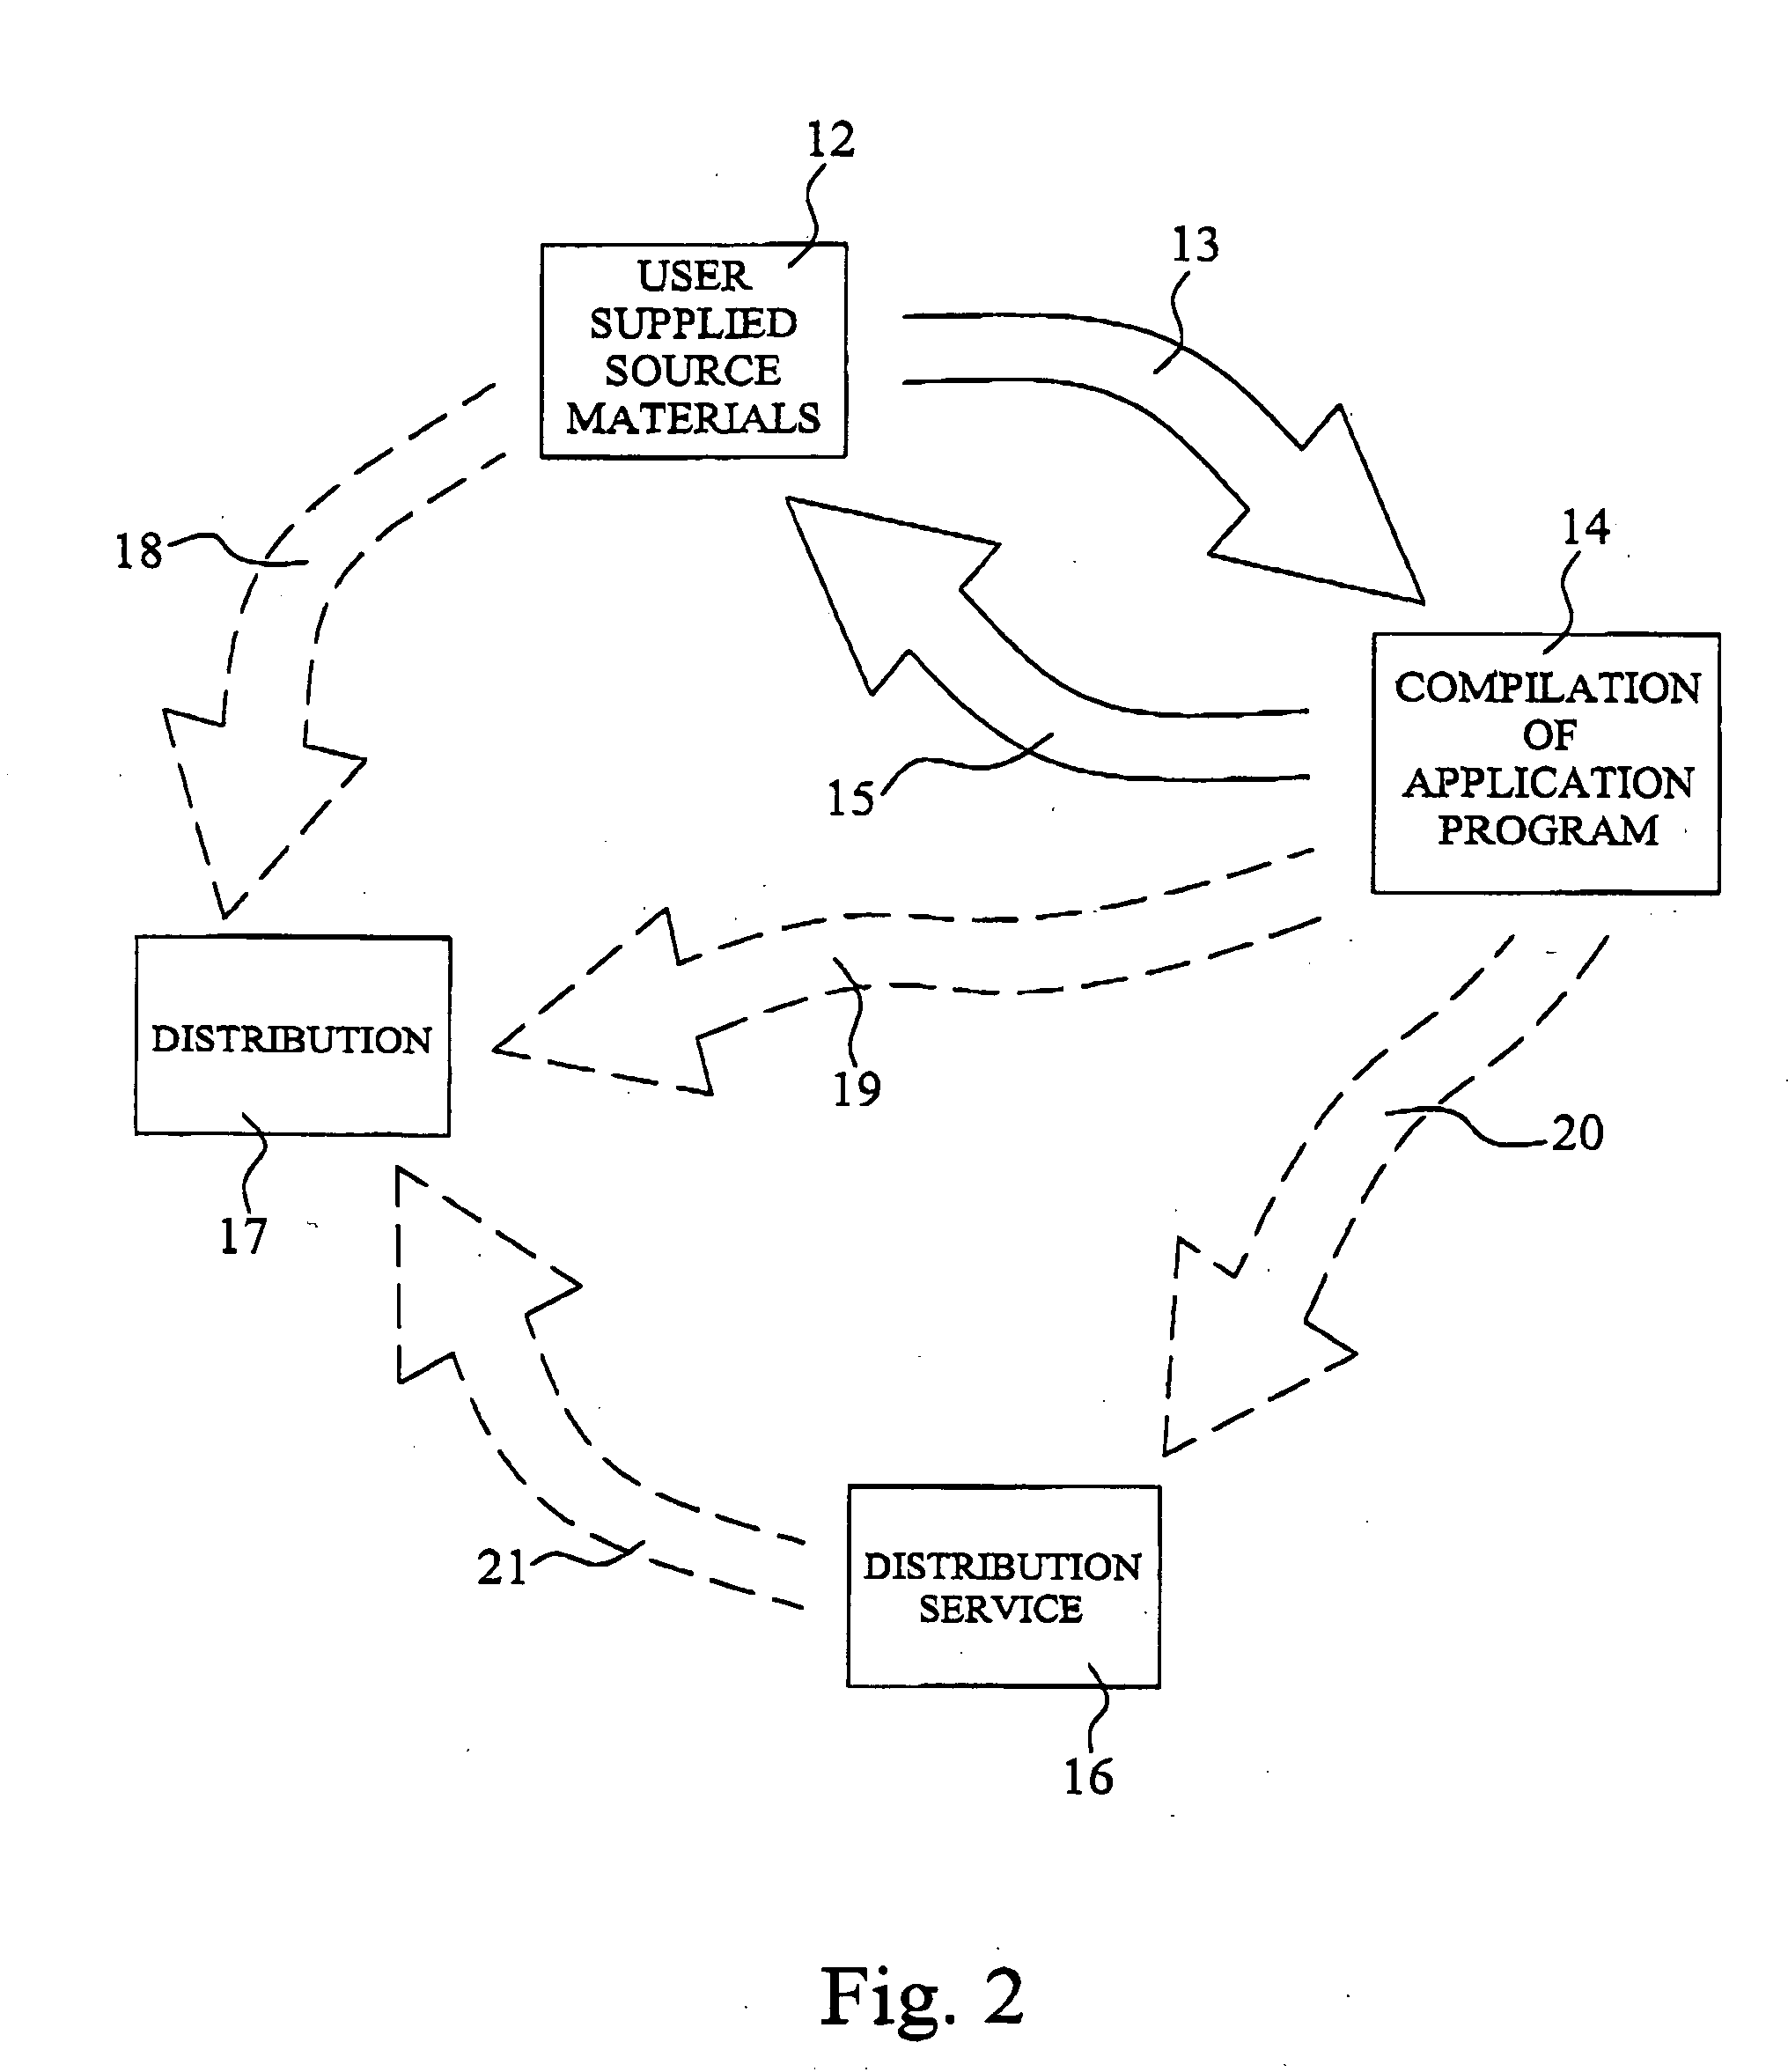 Methods and systems for producing and/or distributing electronic publications